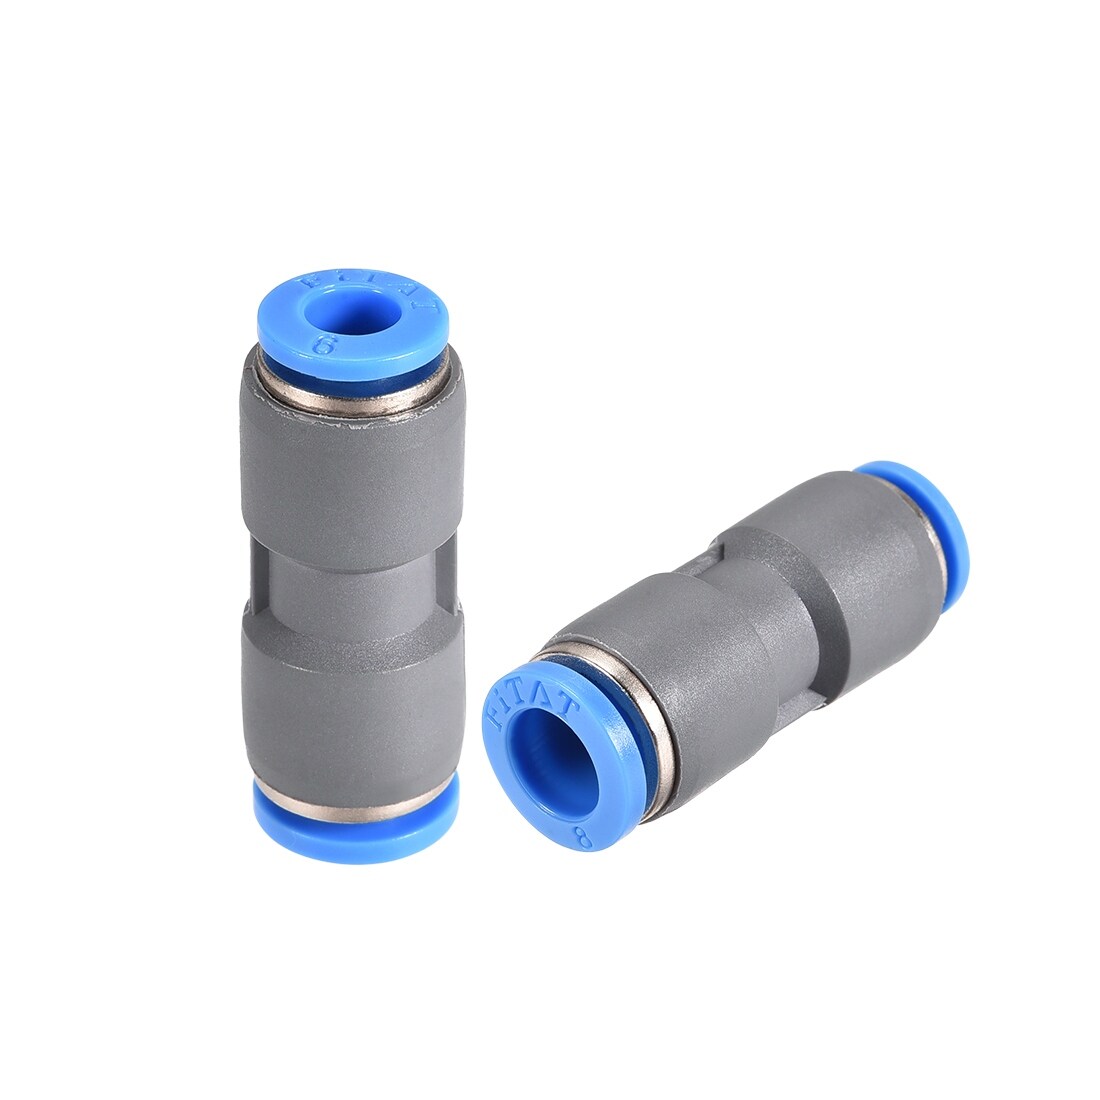 4mm 5//32 OD Straight Pneumatic Connector Metalwork Plastic Push to Connect Straight Union Pipe Tube Fitting Pack of 20